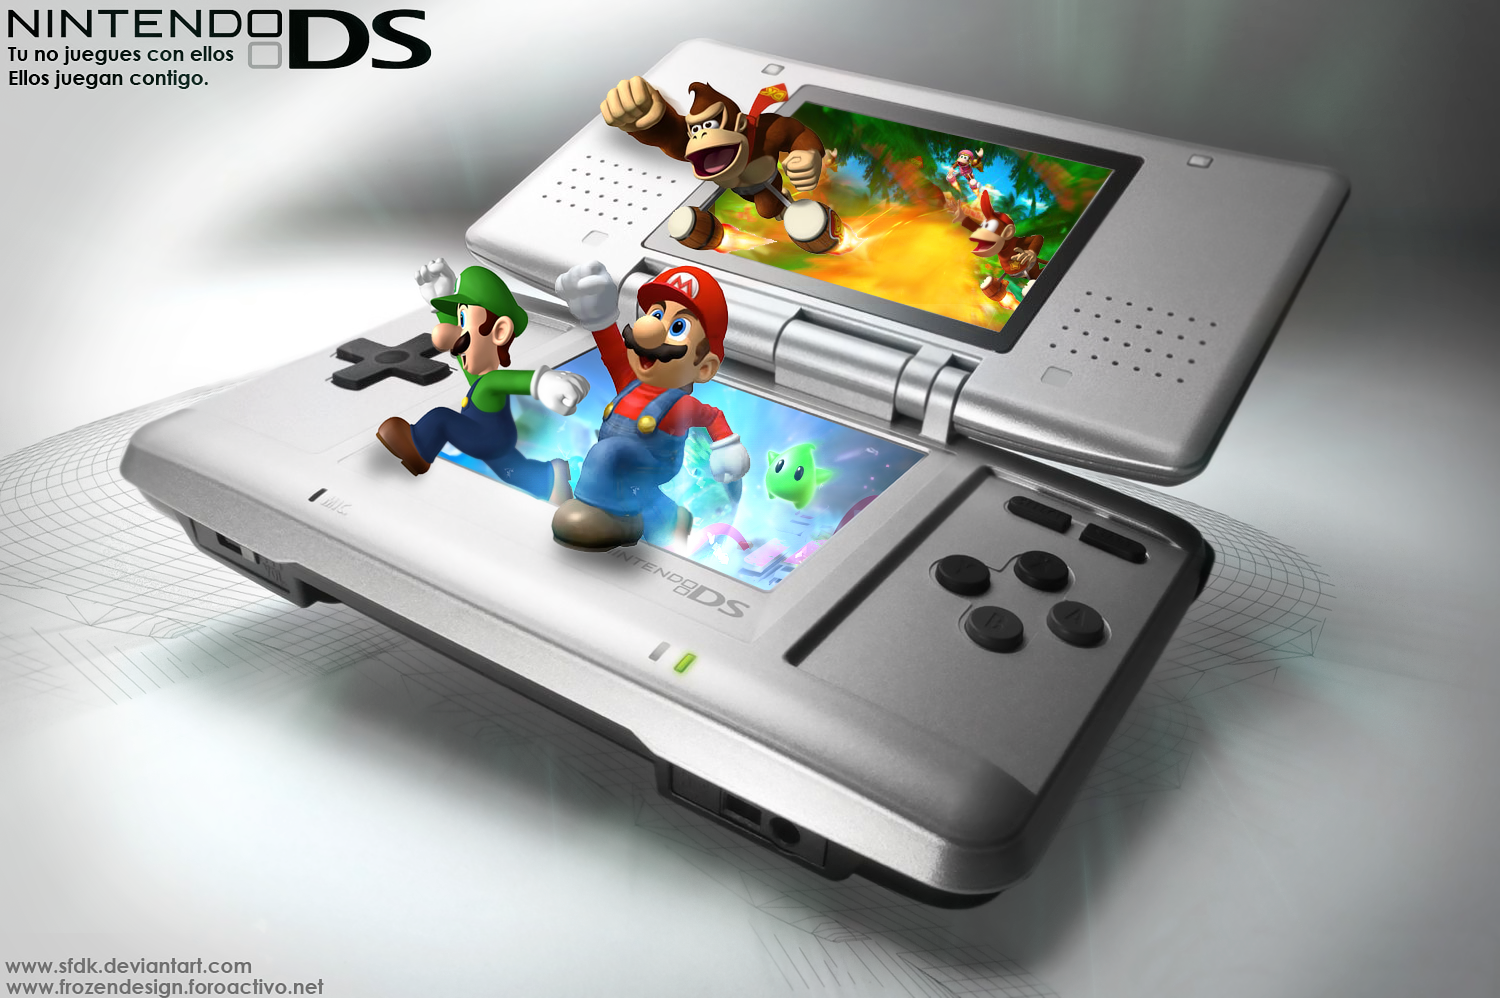 Nintendo-DS-pic7.png